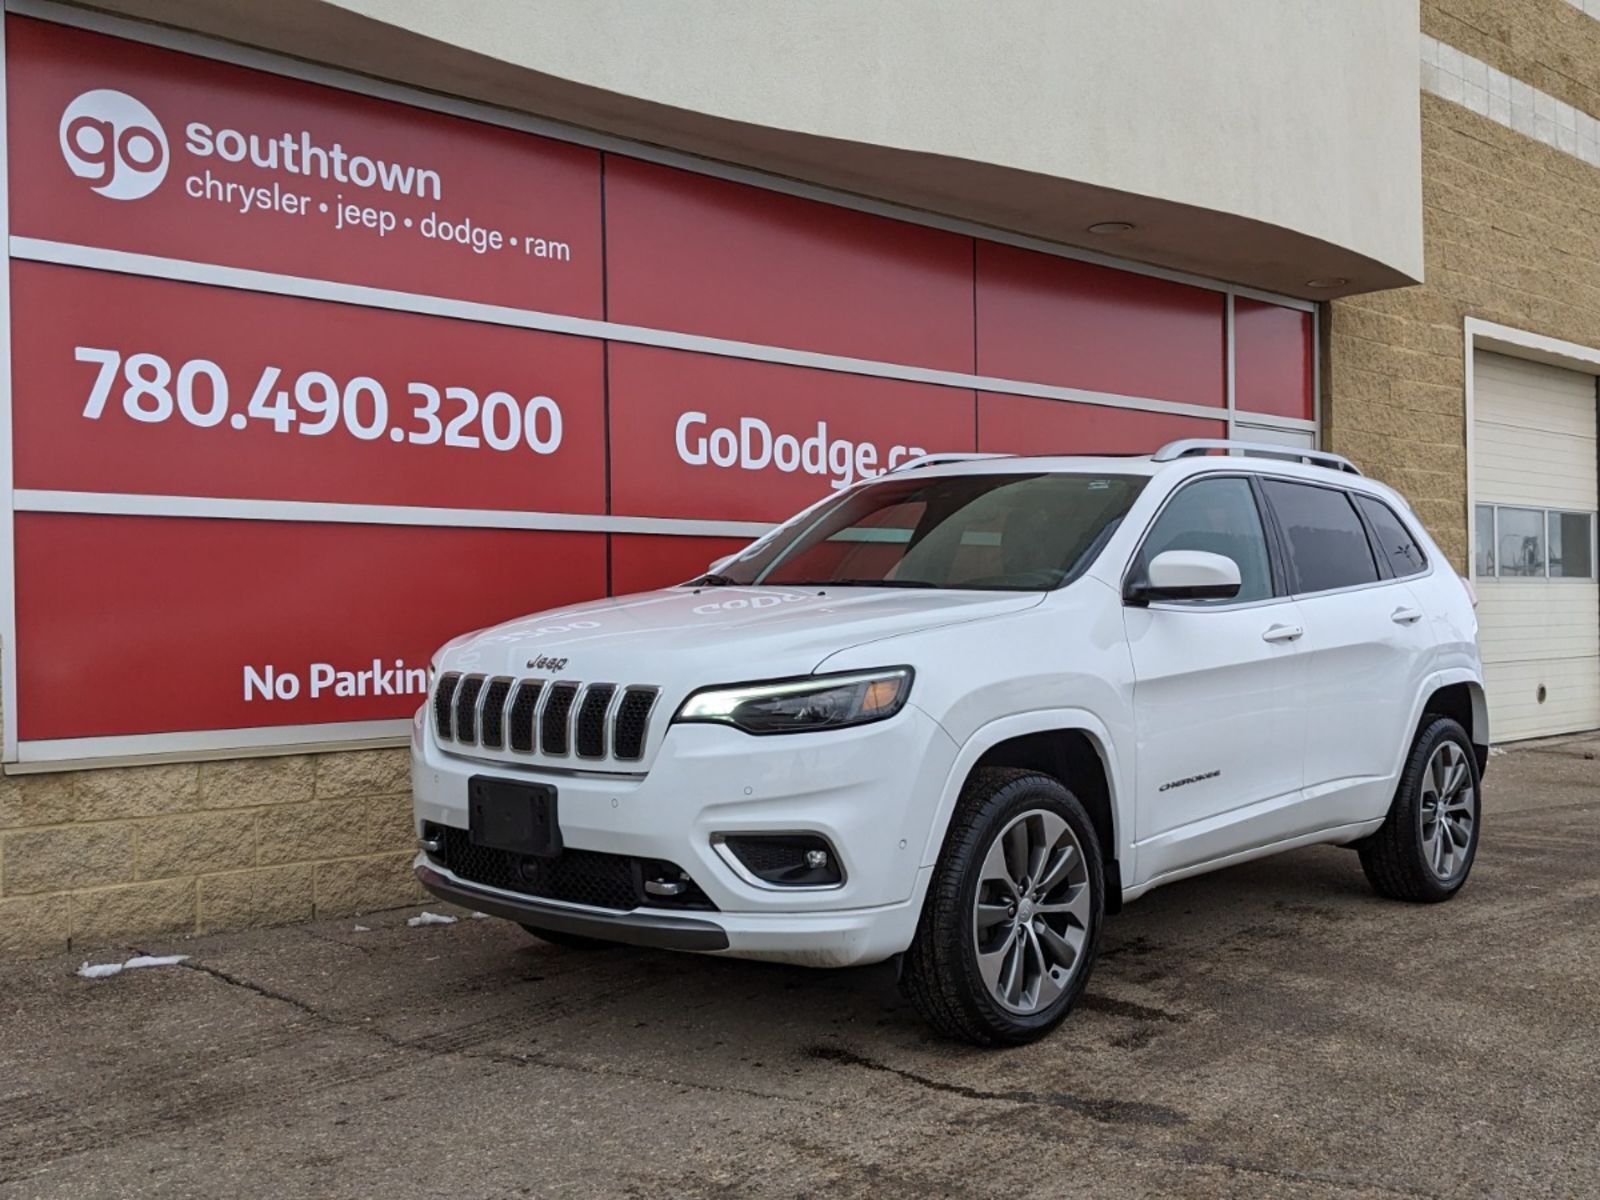 2019 Jeep Cherokee OVERLAND IN BRIGHT WHITE EQUIPPED WITH A 2.0L TURB